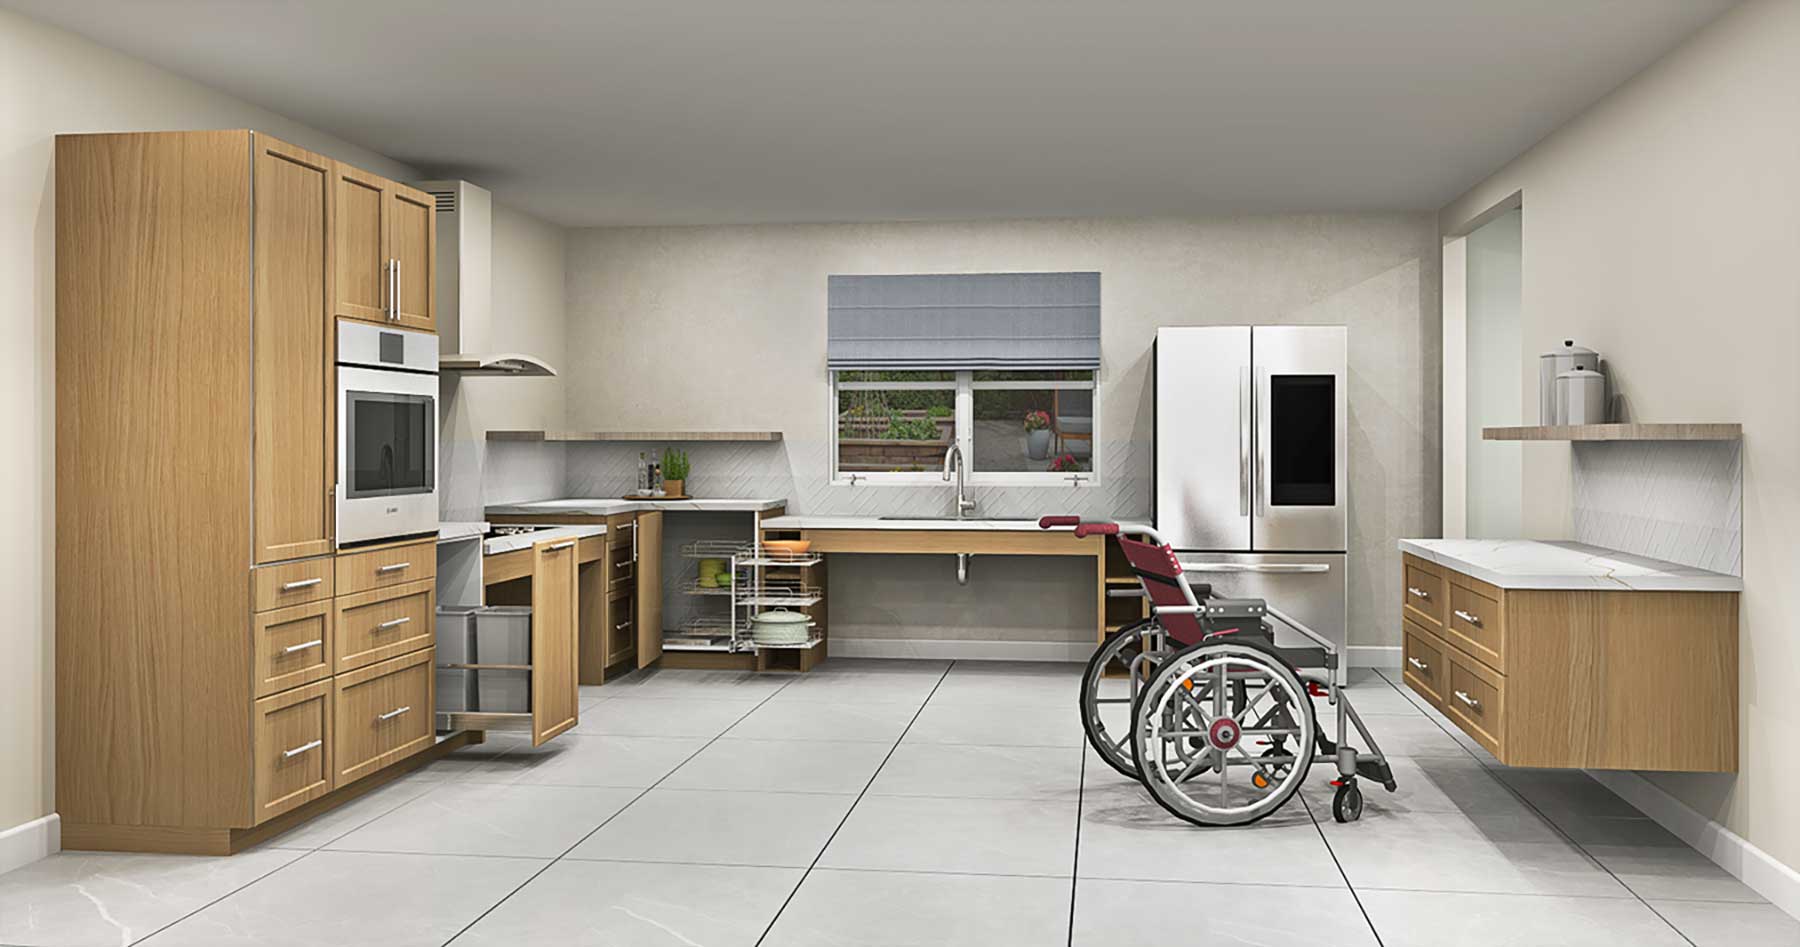 Kitchen Tips for People with Mobility Impairments